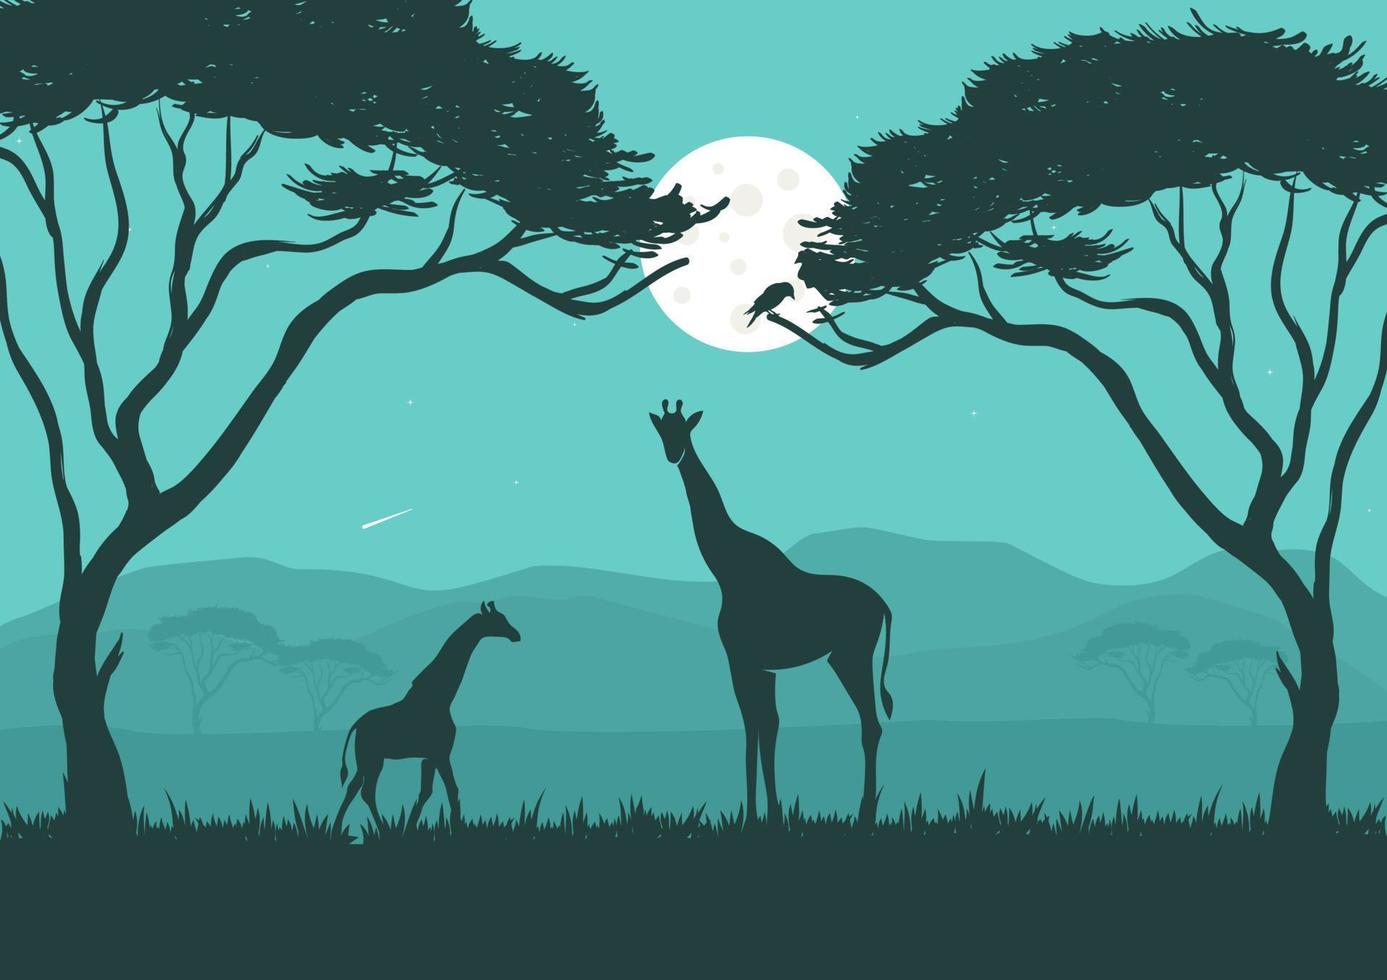 Giraffes in the savanna with a full moon at night. Vector illustration